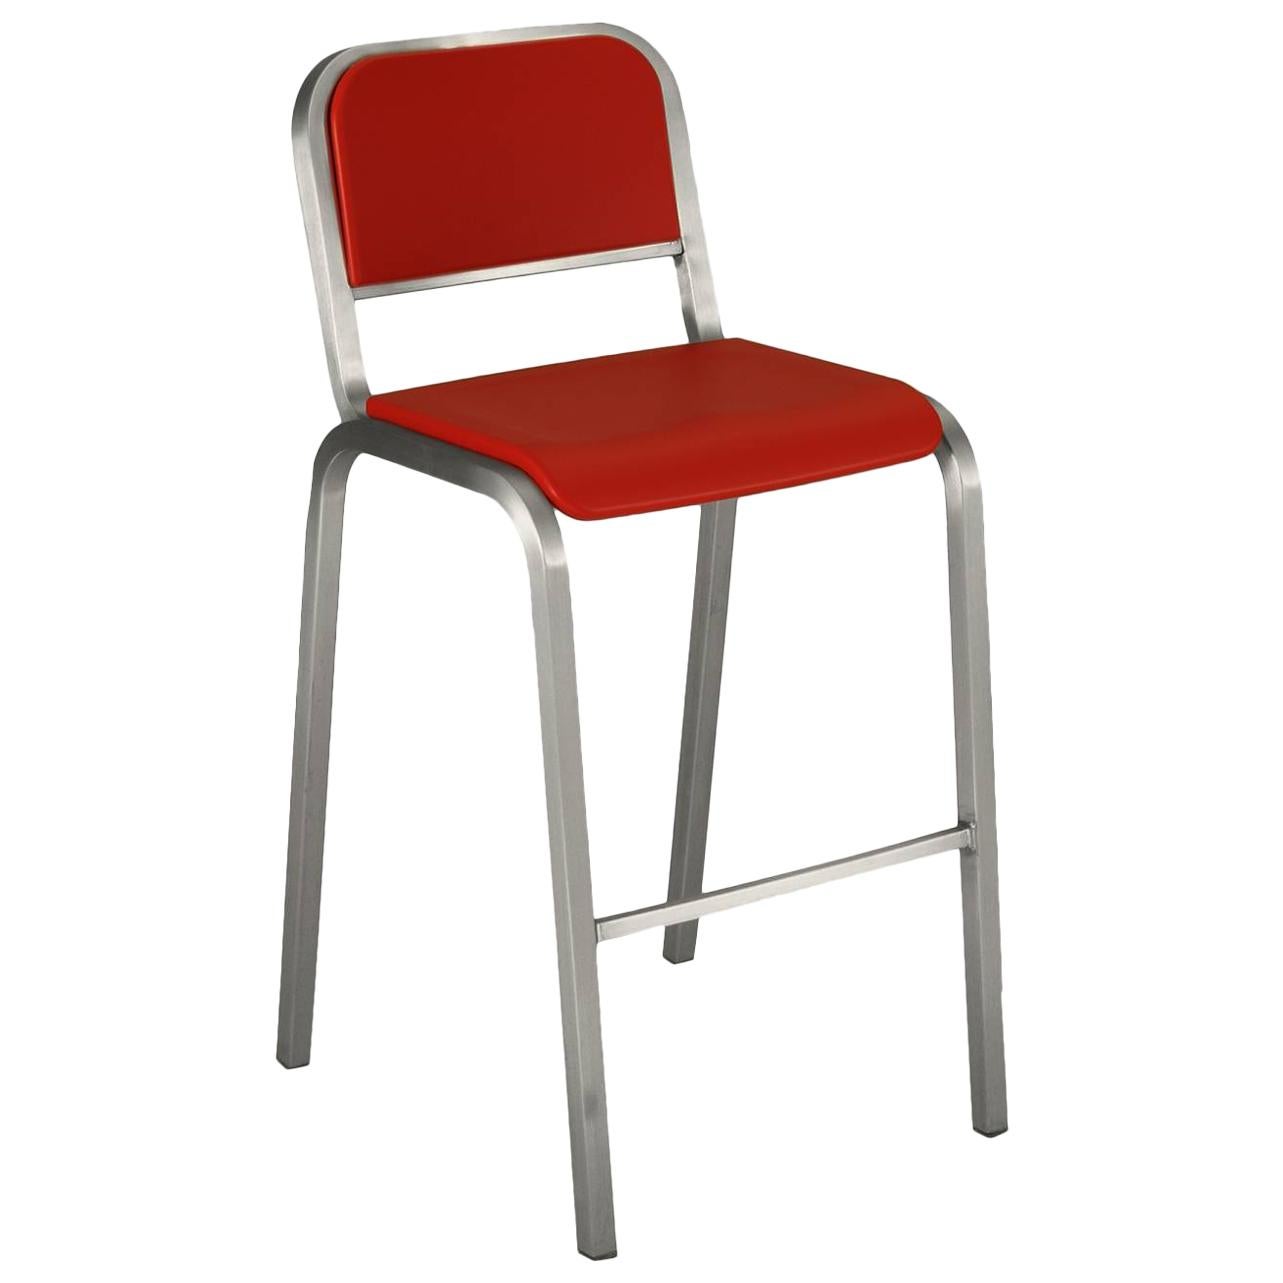 Emeco Nine-0 Barstool in Brushed Aluminum and Red by Ettore Sottsass